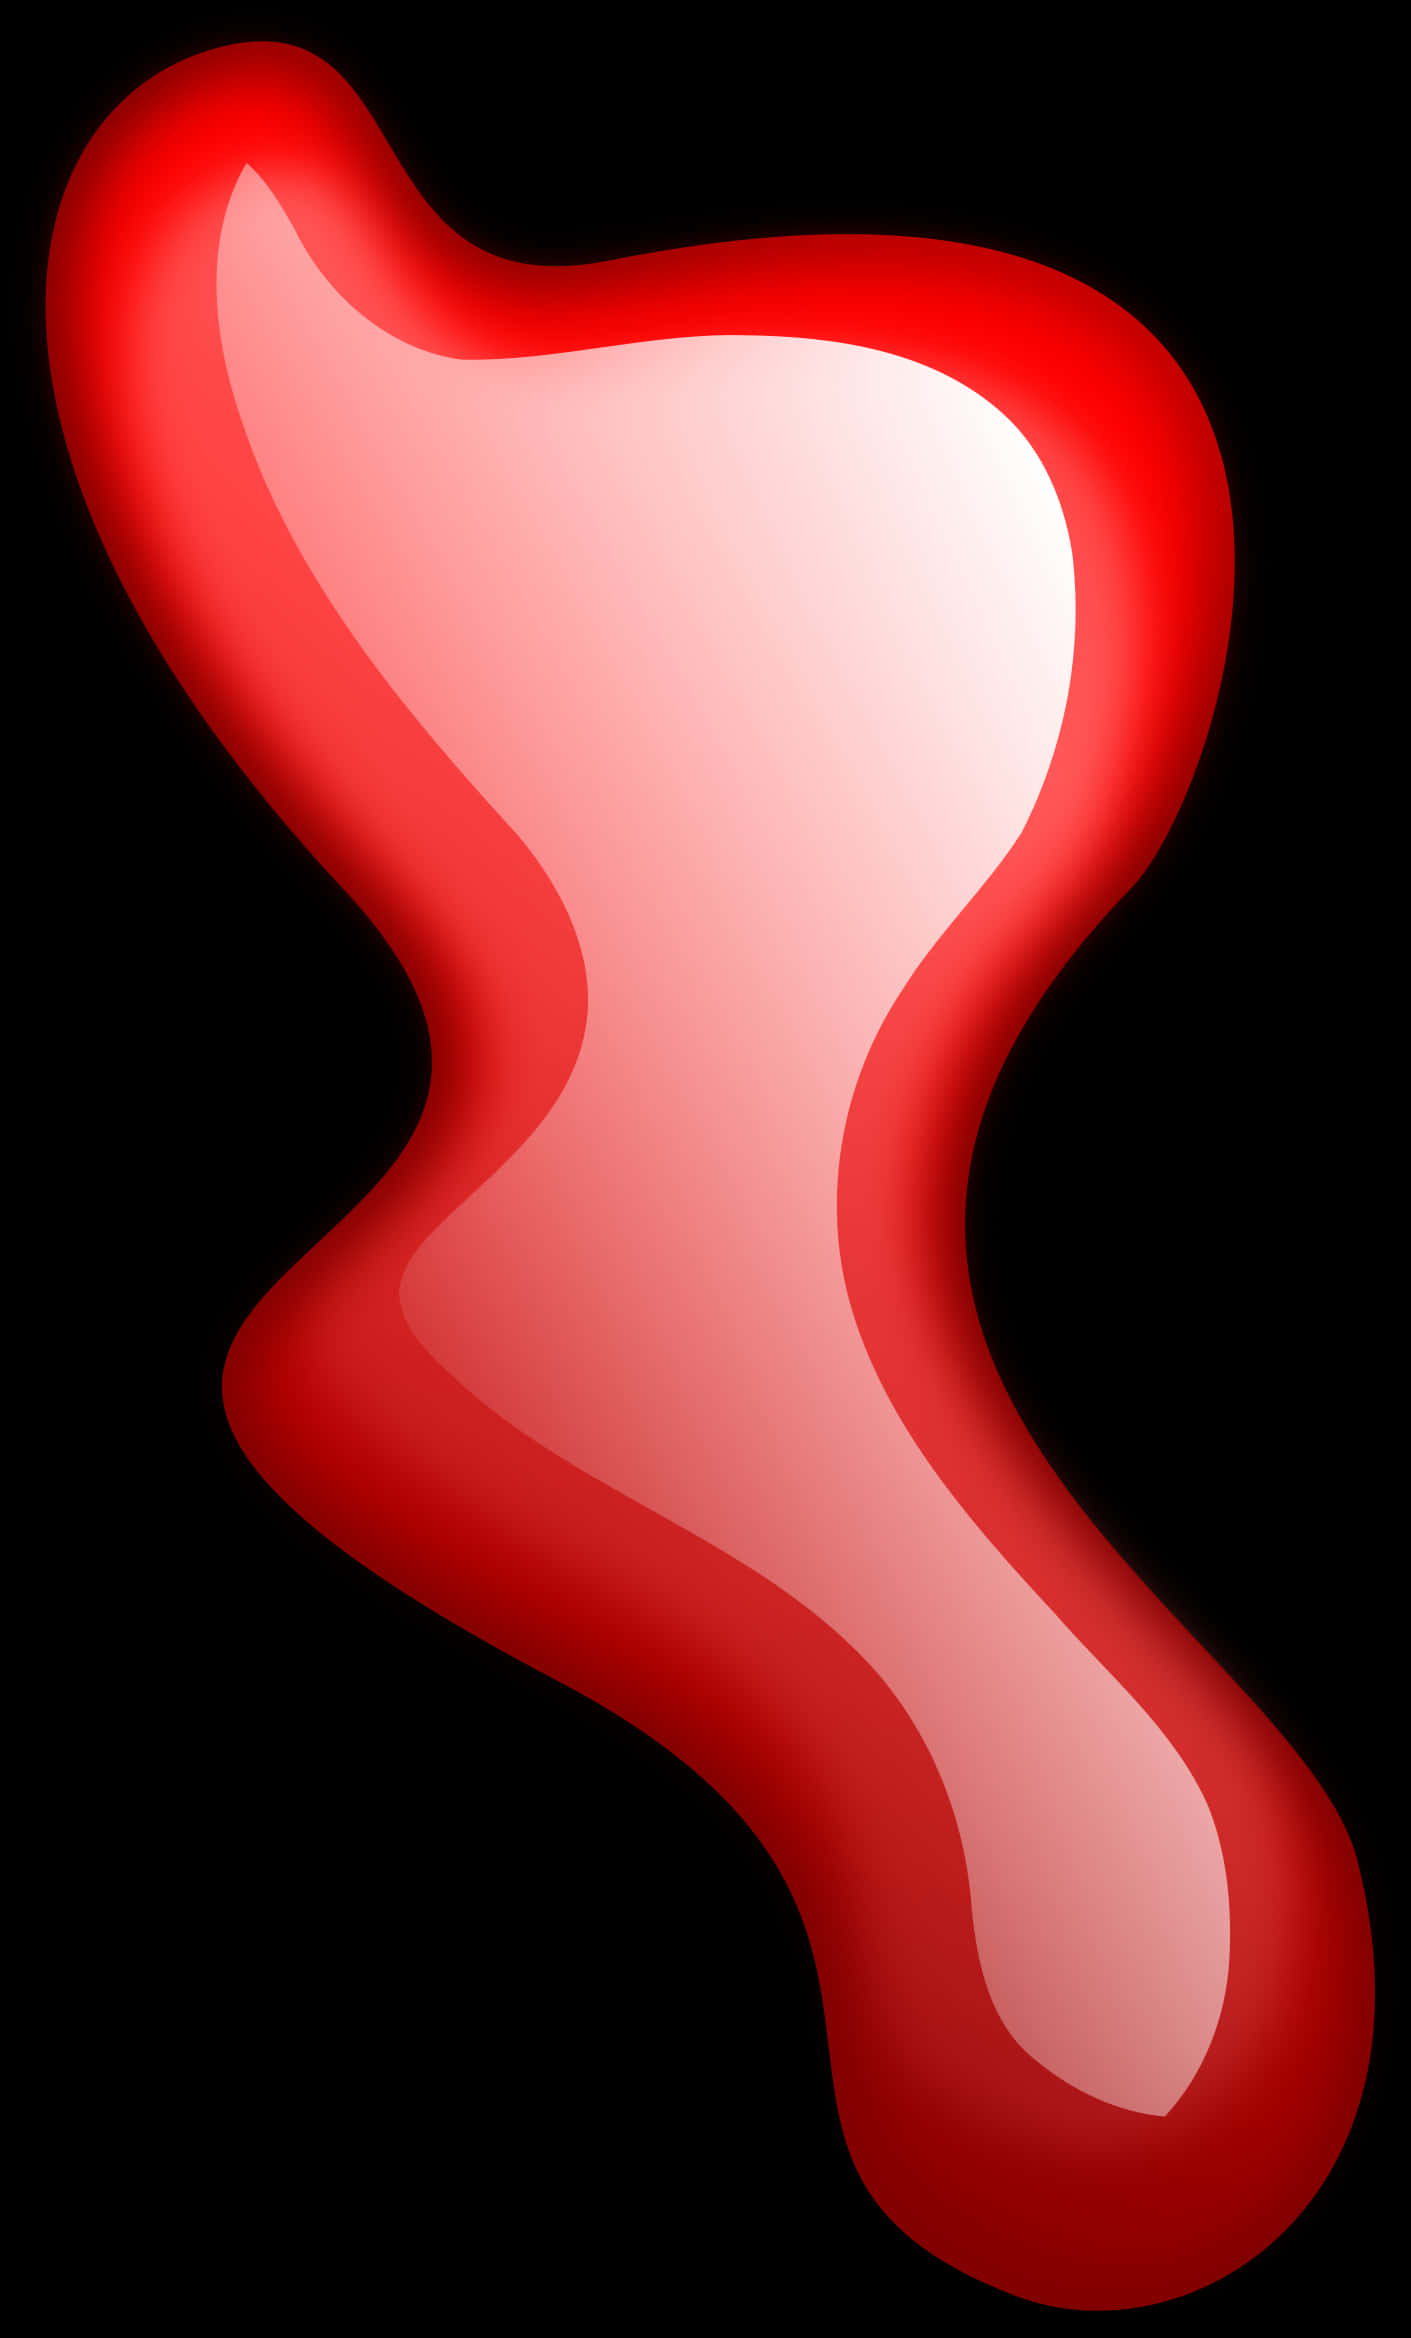 Abstract Blood Drop Illustration PNG image